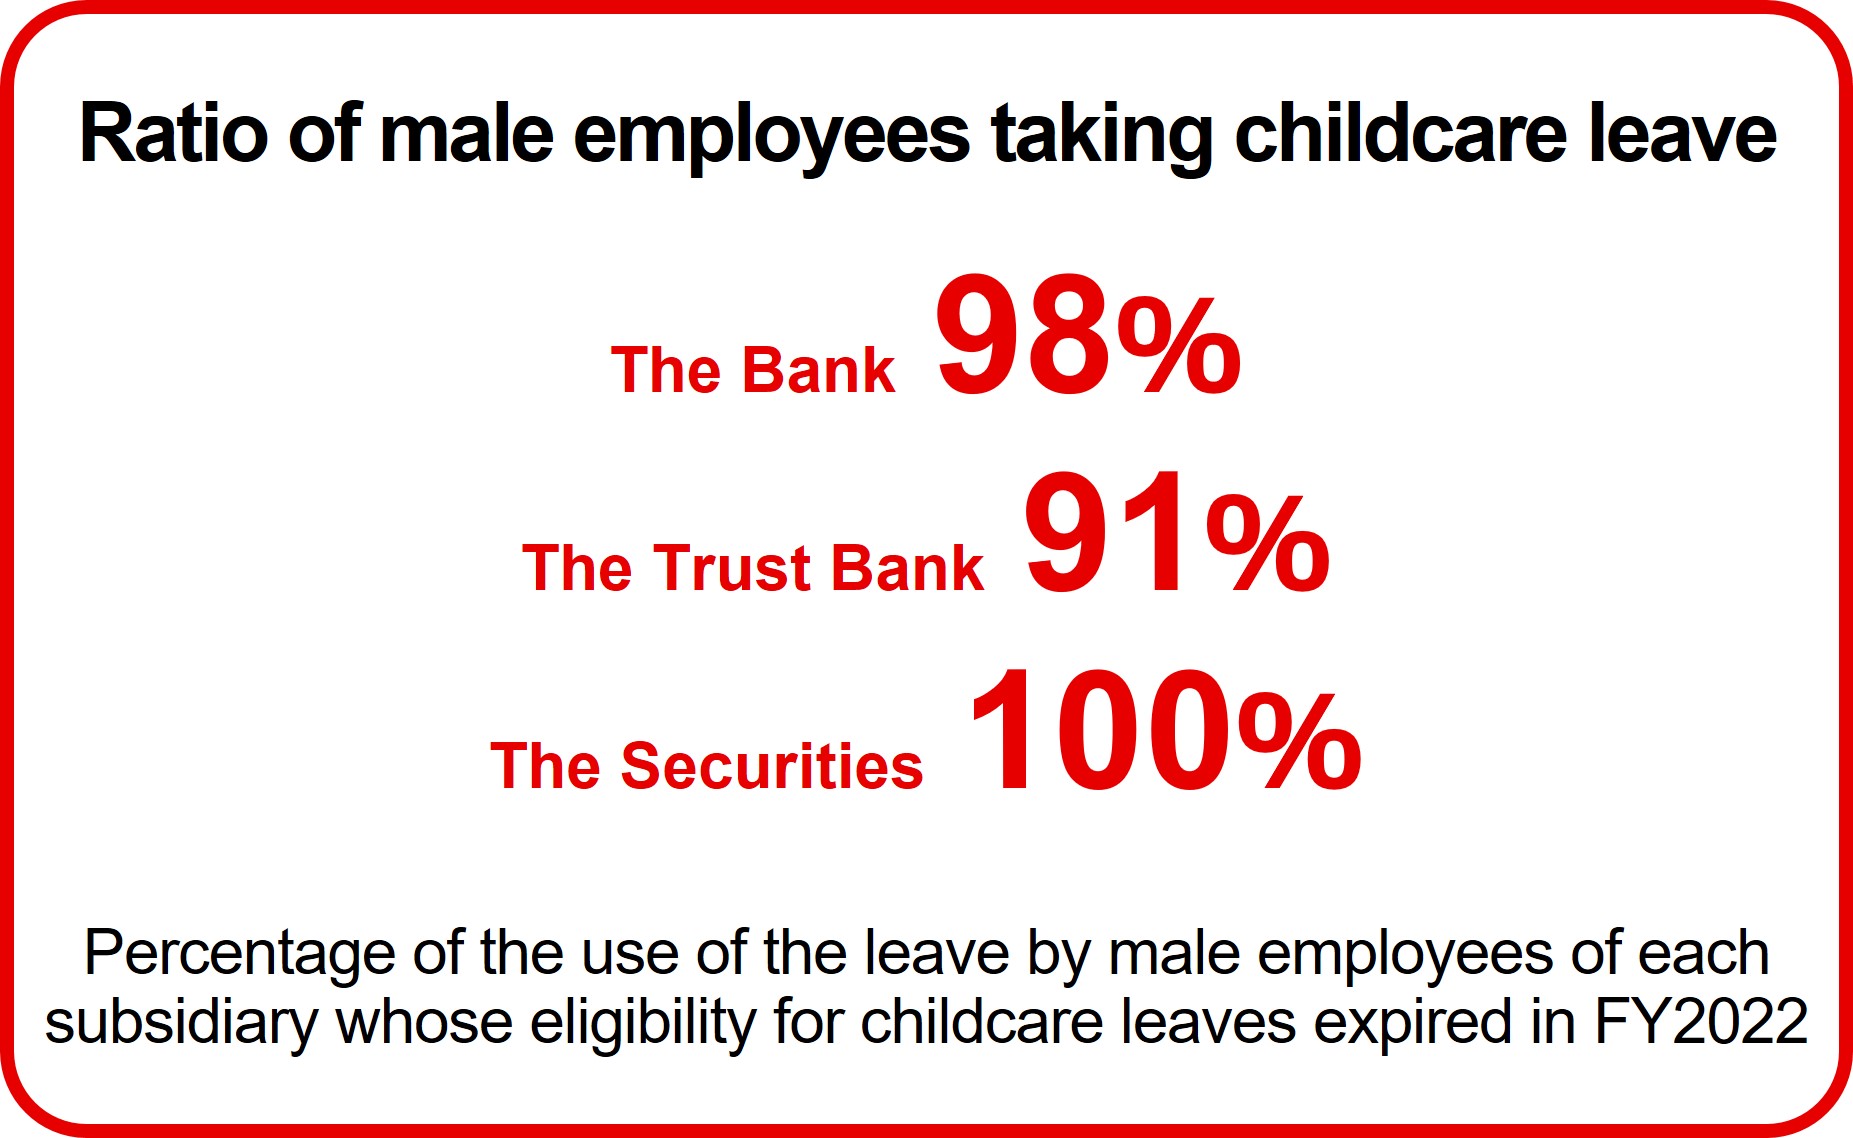 Ratio of male employees taking childcare leave